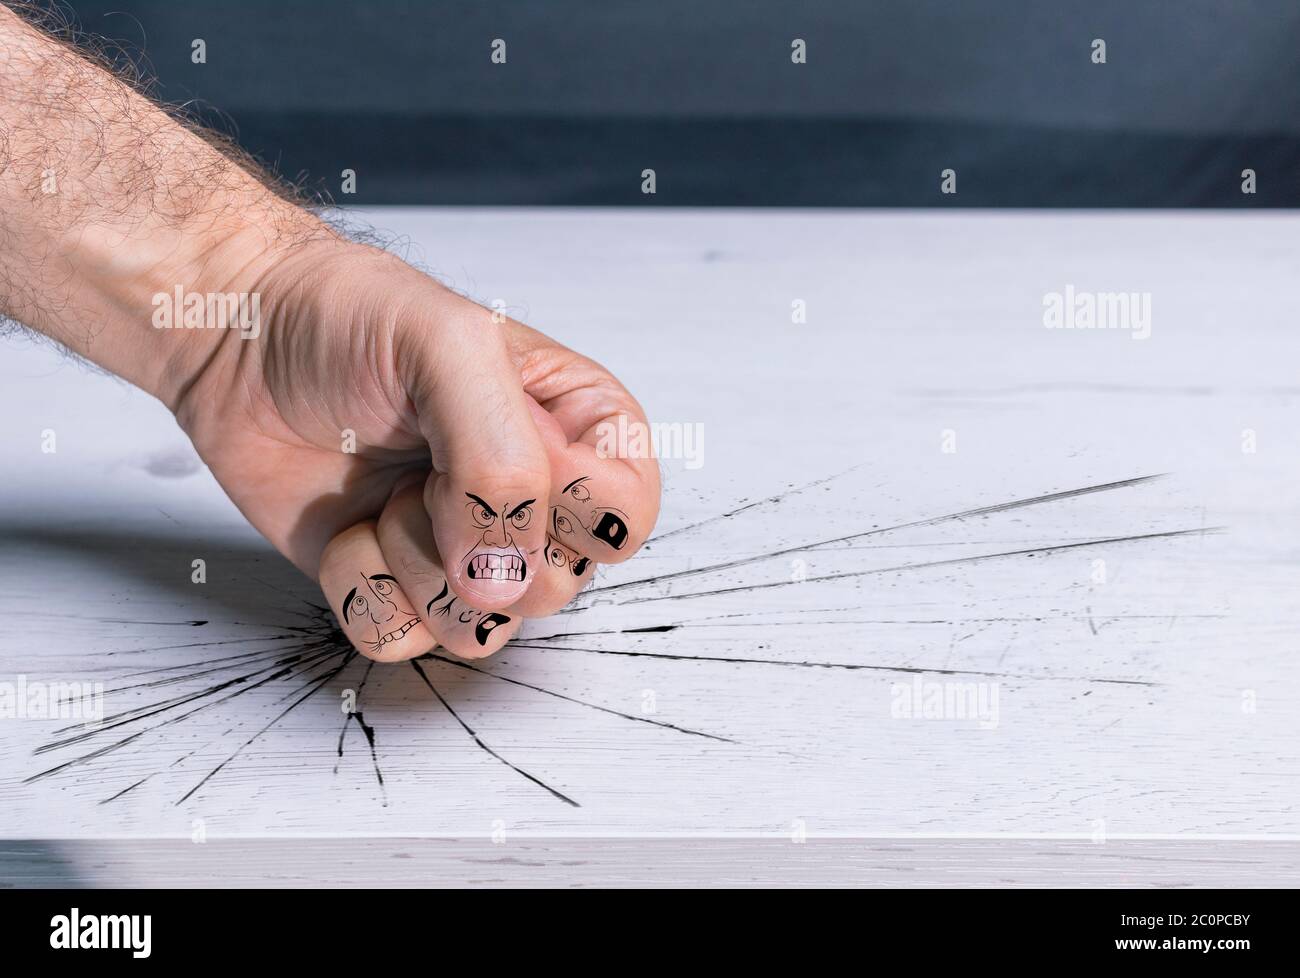 Fist hitting table with violence, with cartoons on the fingers simulating bullying, male violence, gender violence and domination Stock Photo